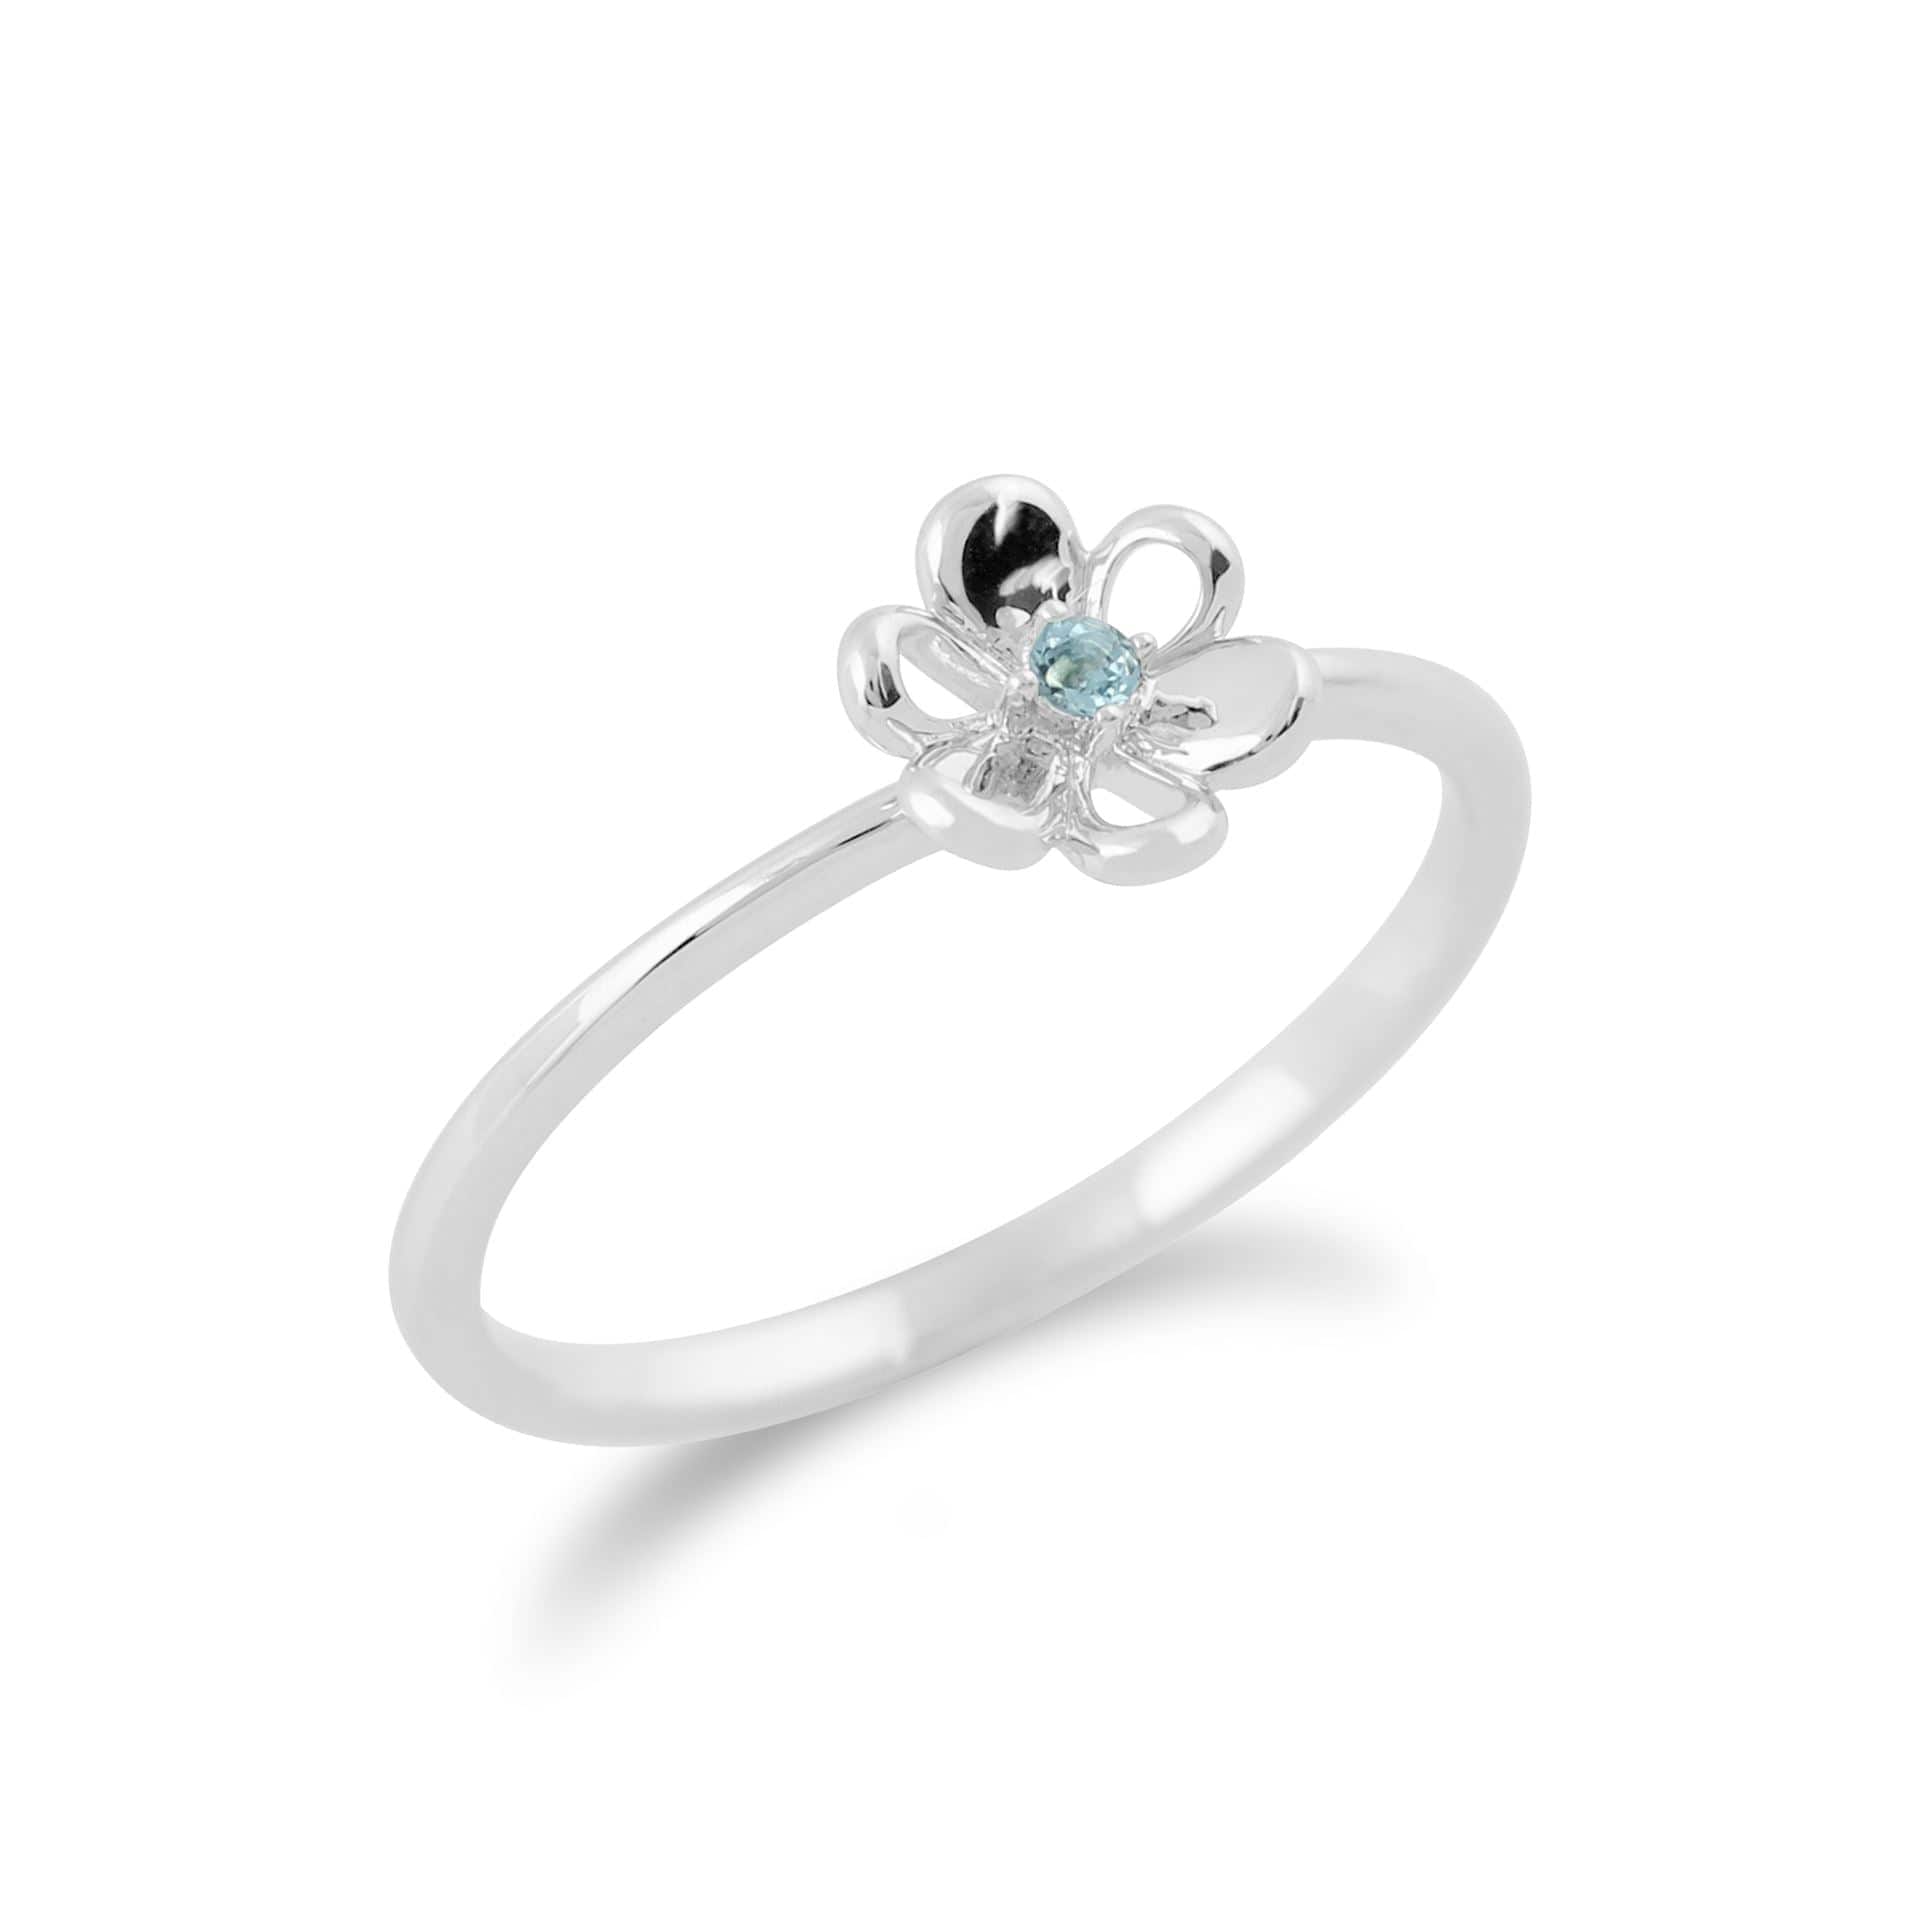 Gemondo 9ct White Gold 0.02ct Blue Topaz Stackable Floral Ring Image 2